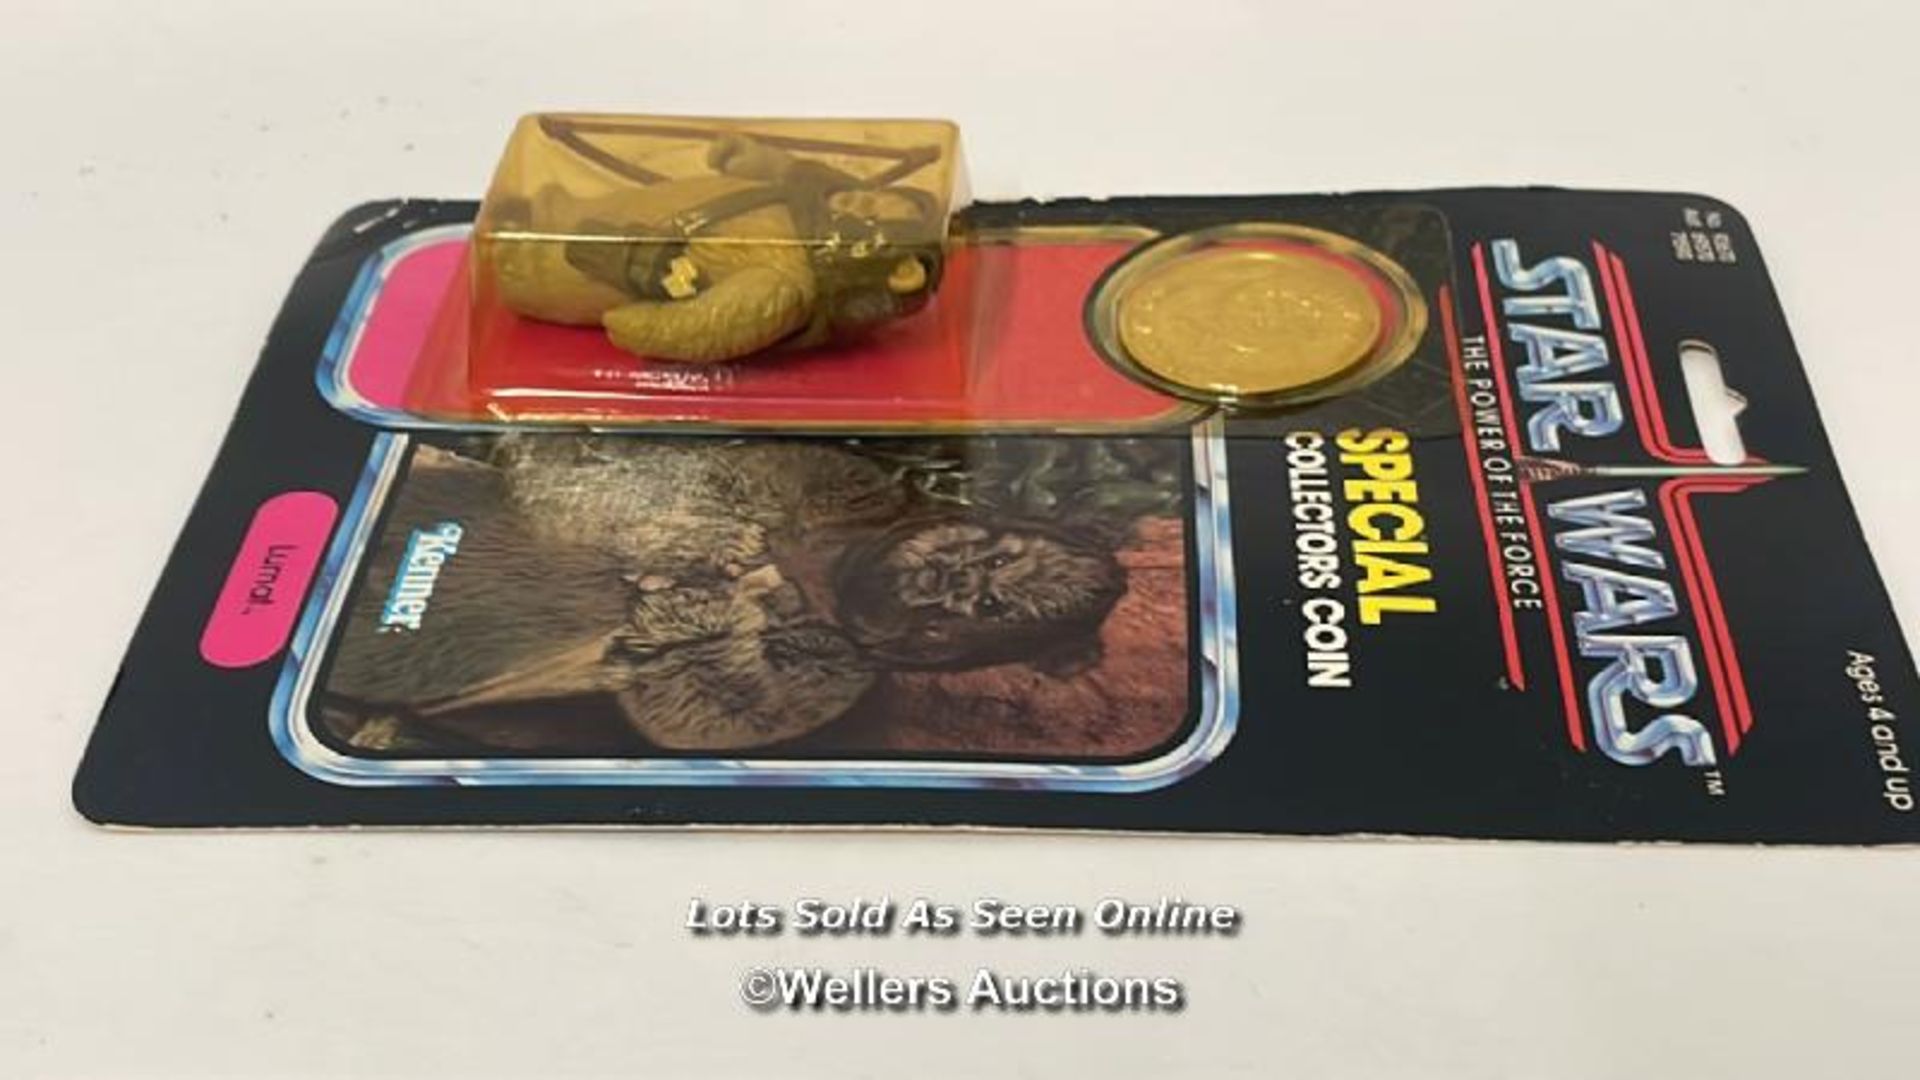 Star Wars vintage Lumat 3 3/4" figure, Power of the Force 92 back with collectors coin, Kenner 1984, - Image 6 of 11